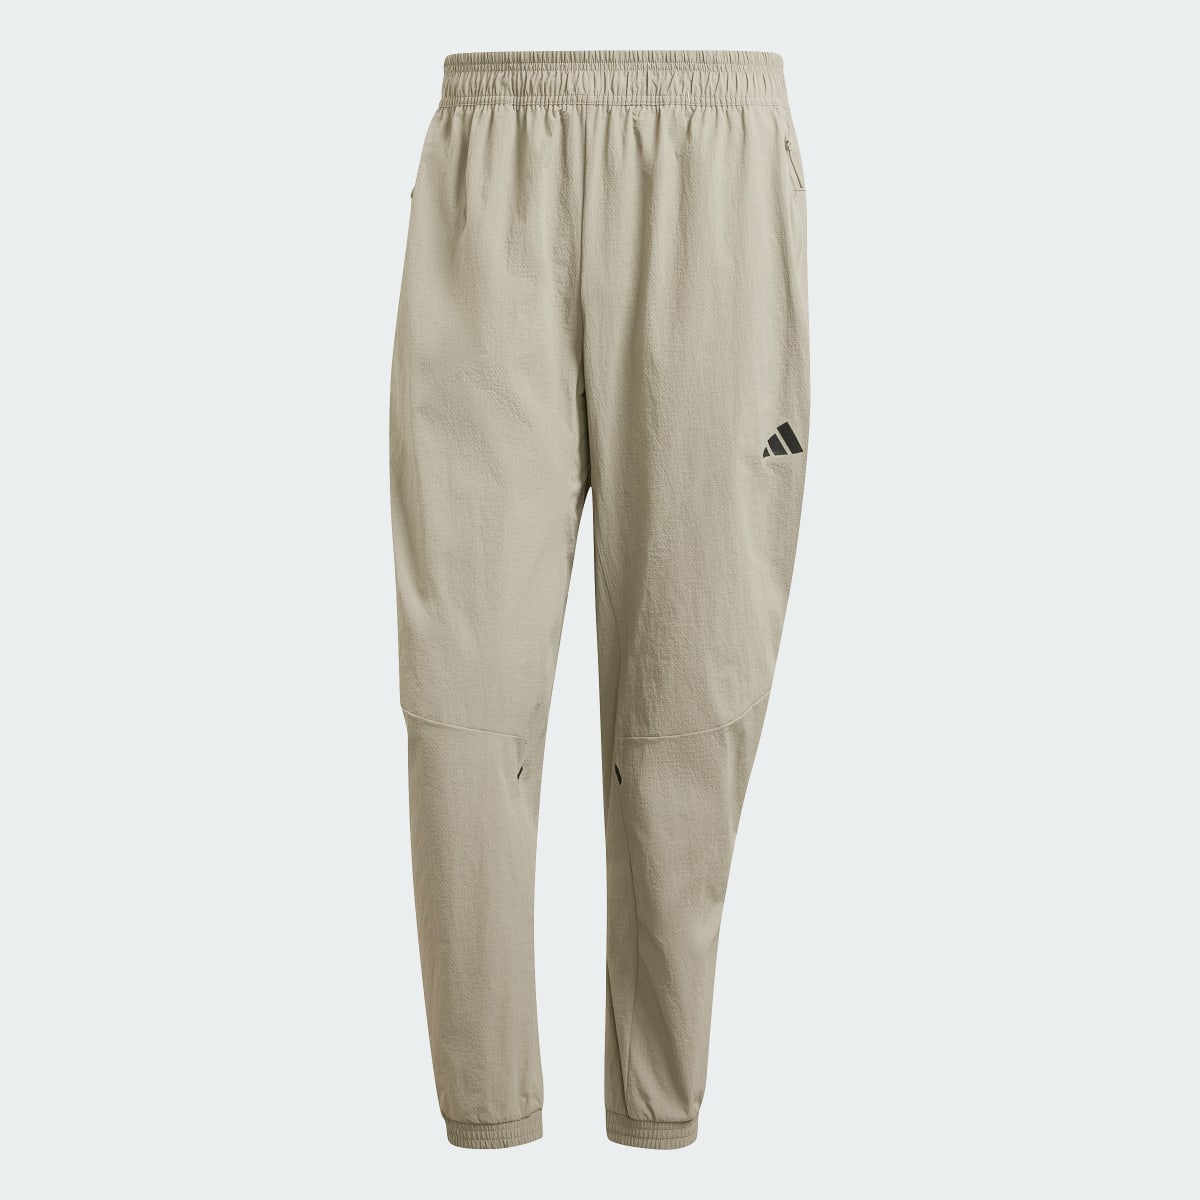 Adidas Designed for Training Workout Pants. 5